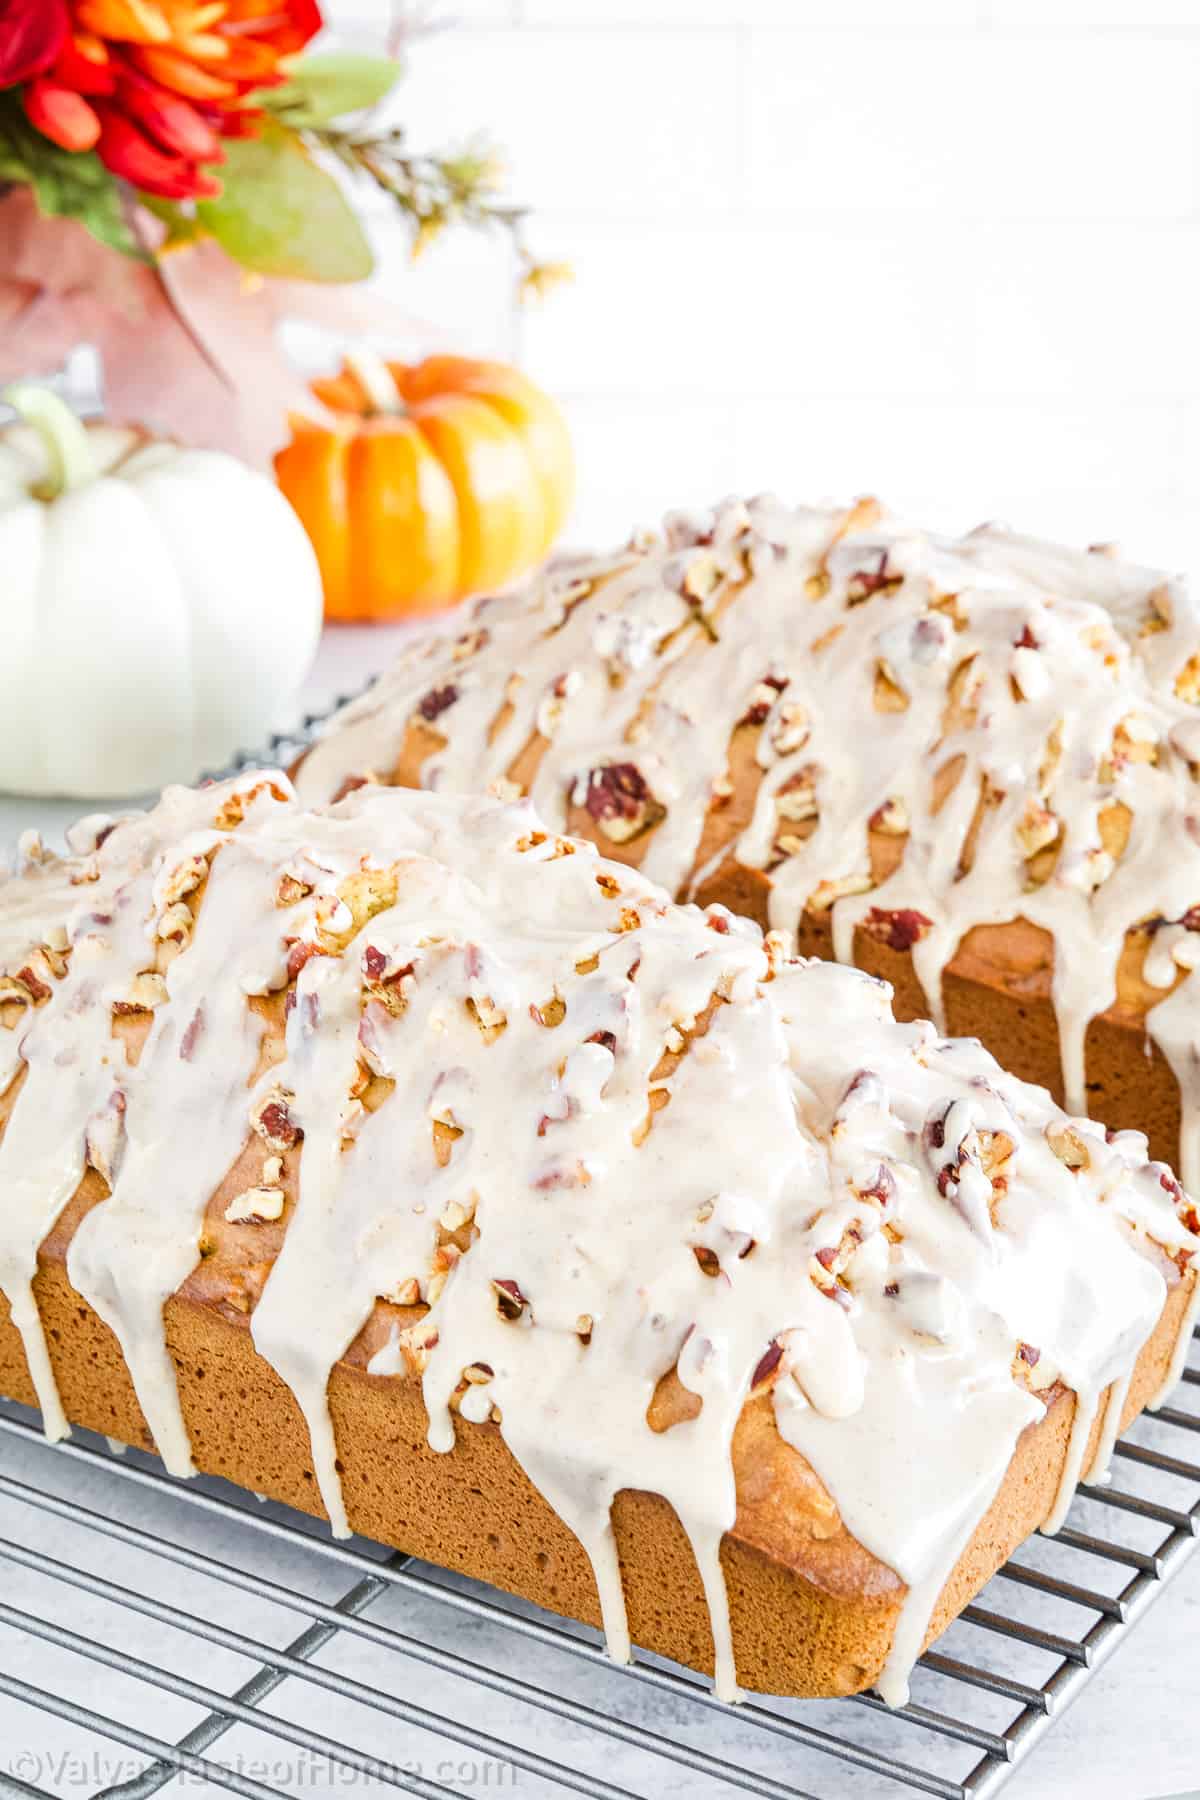 Pumpkin pecan bread is a delightful quick bread that combines the rich, moist flavors of pumpkin with the crunchy, nutty taste of pecans.